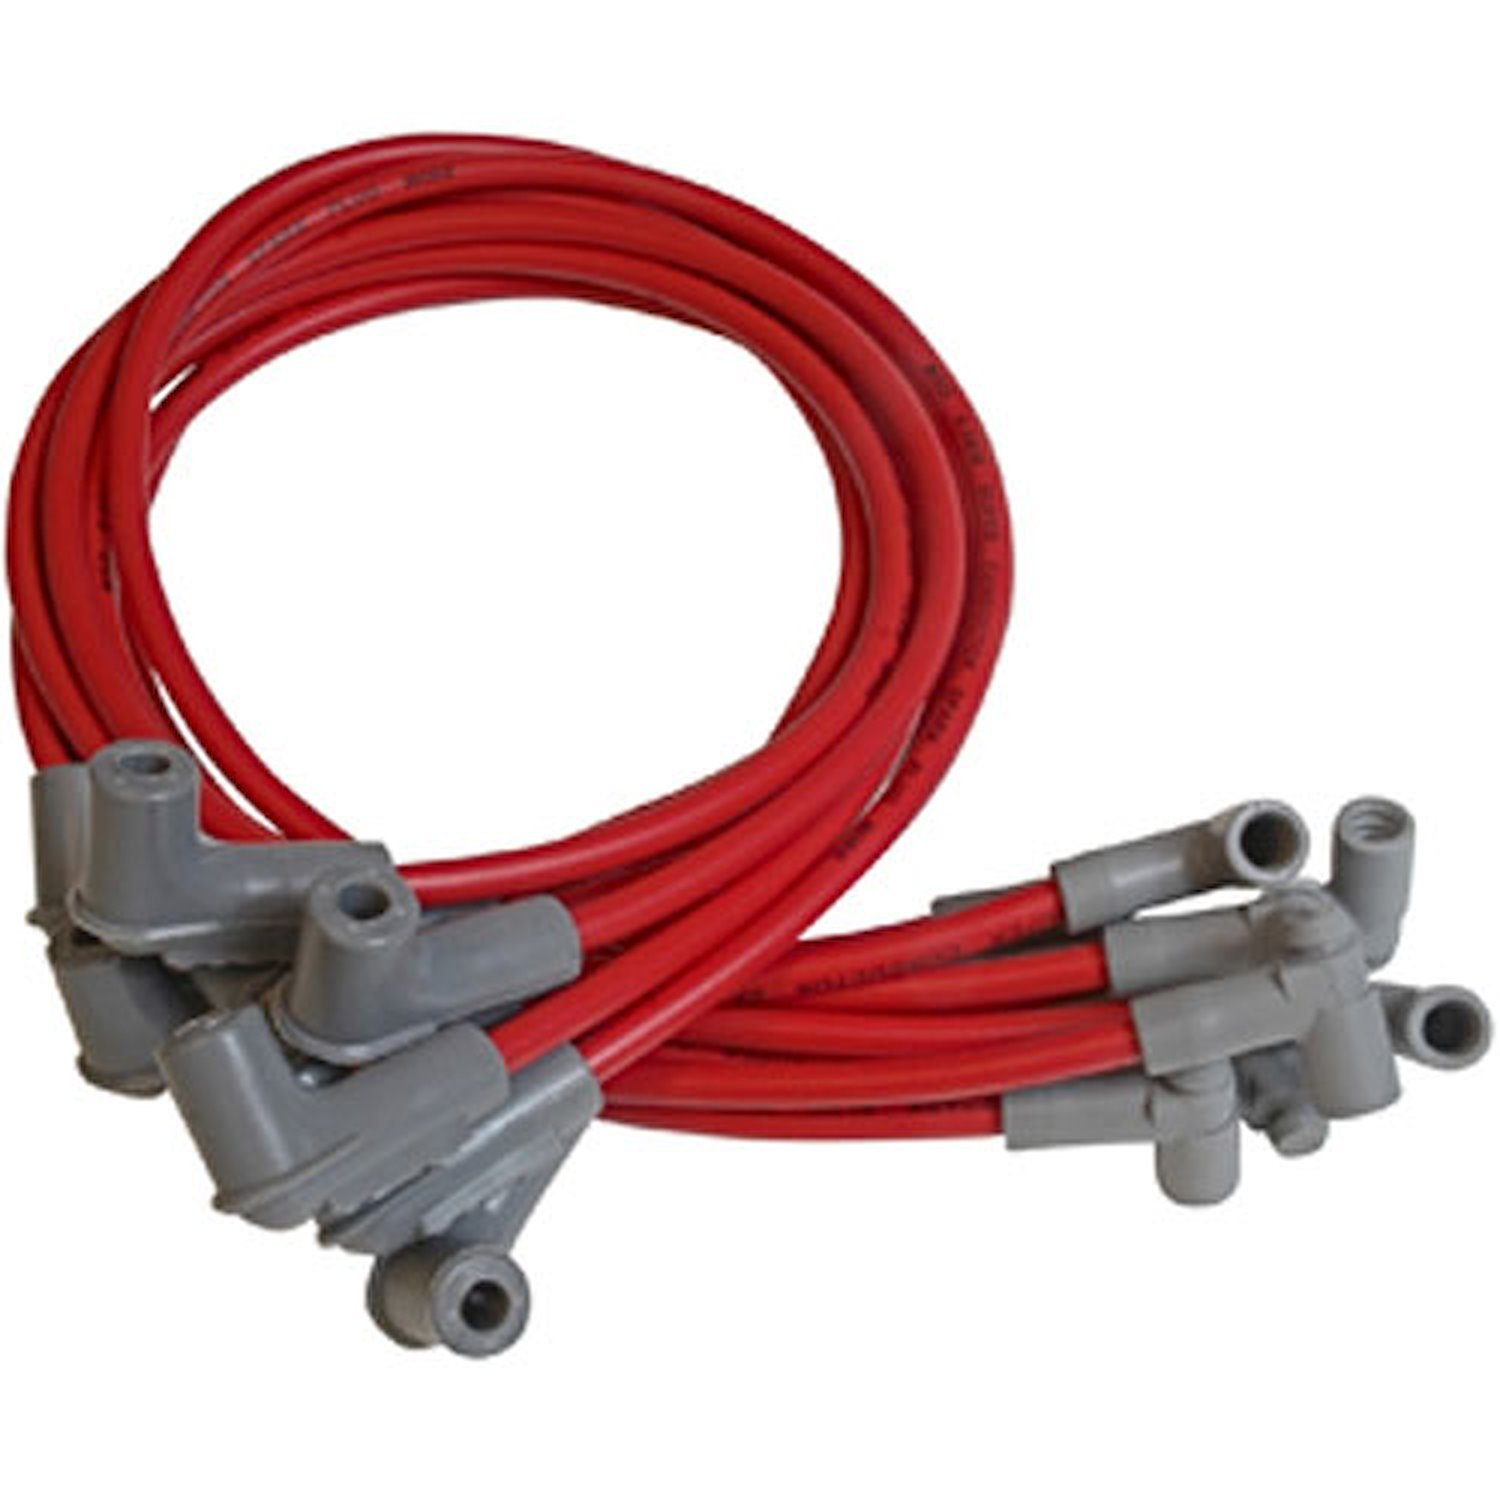 Moroso 73684 Red Ultra 40 High Performance Spark Plug Wires Chevy HEI 350  90*